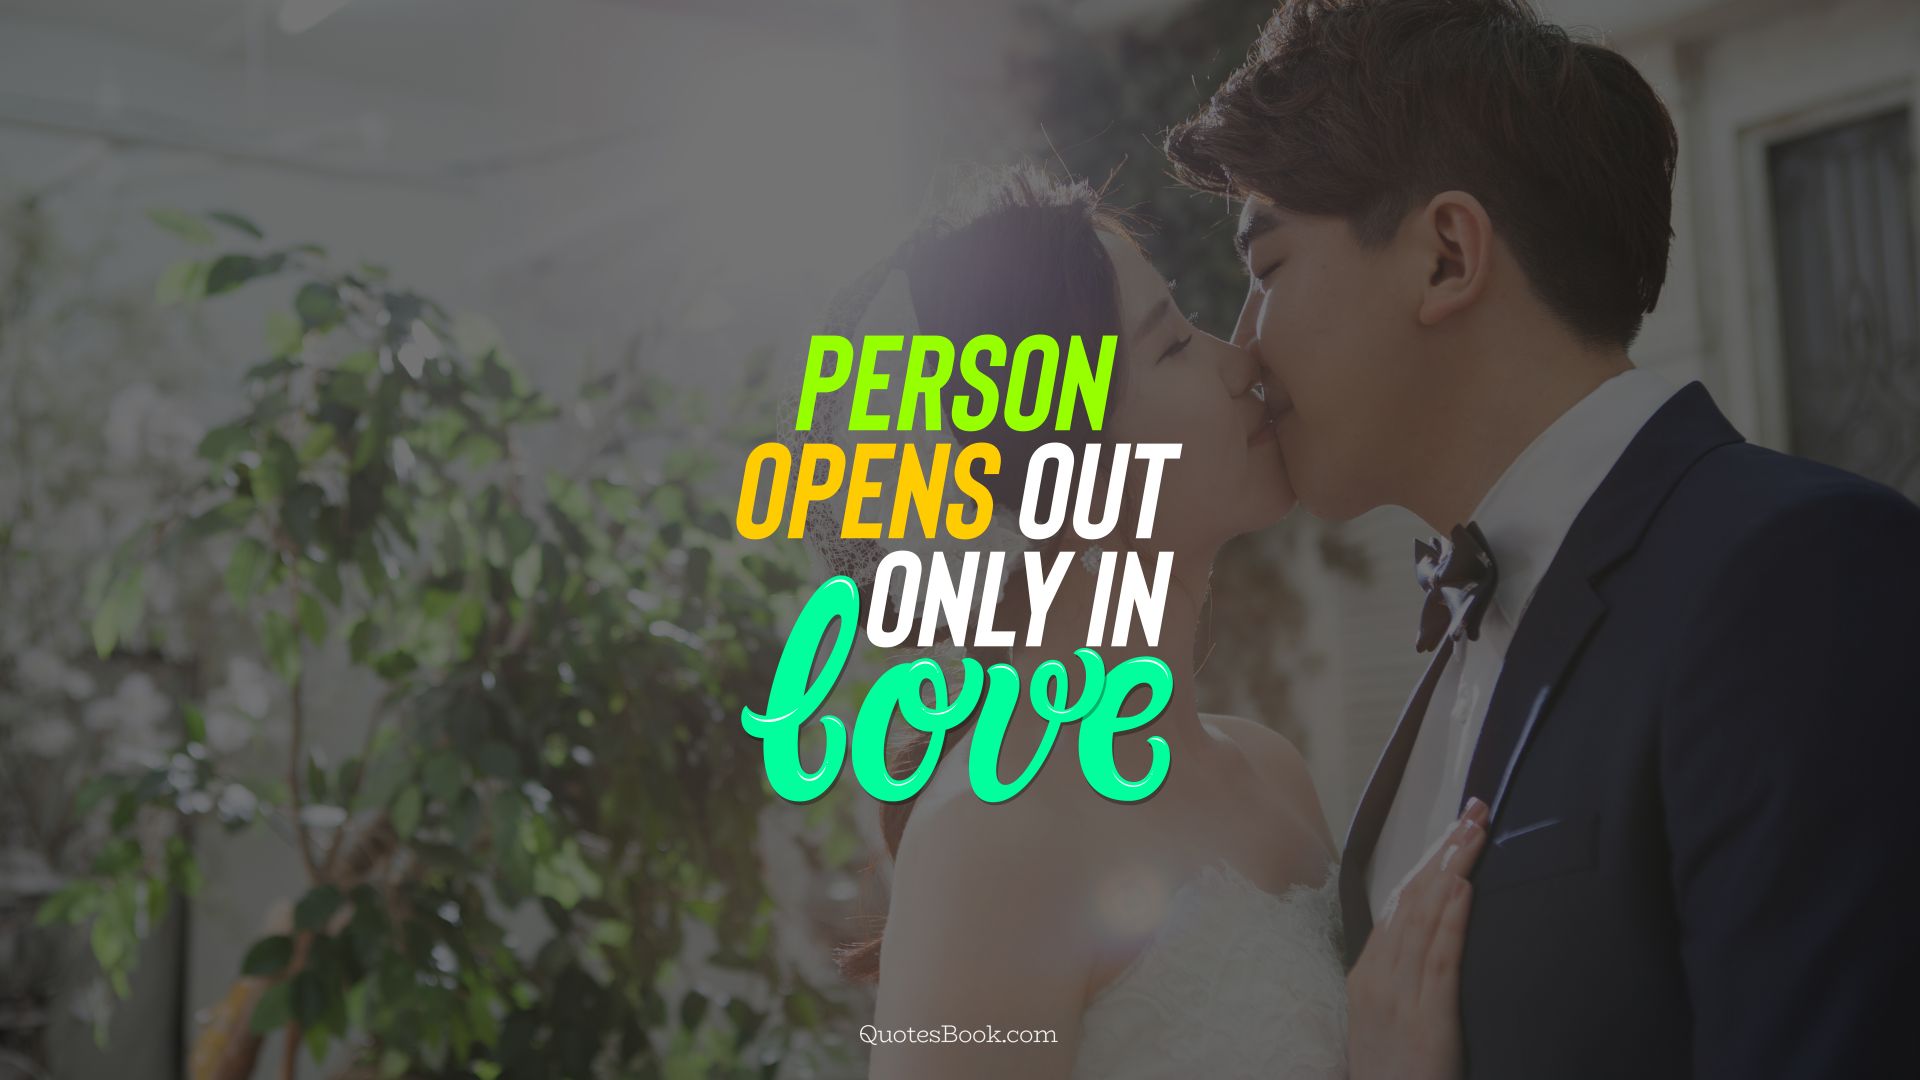 Person opens out only in love. - Quote by QuotesBook